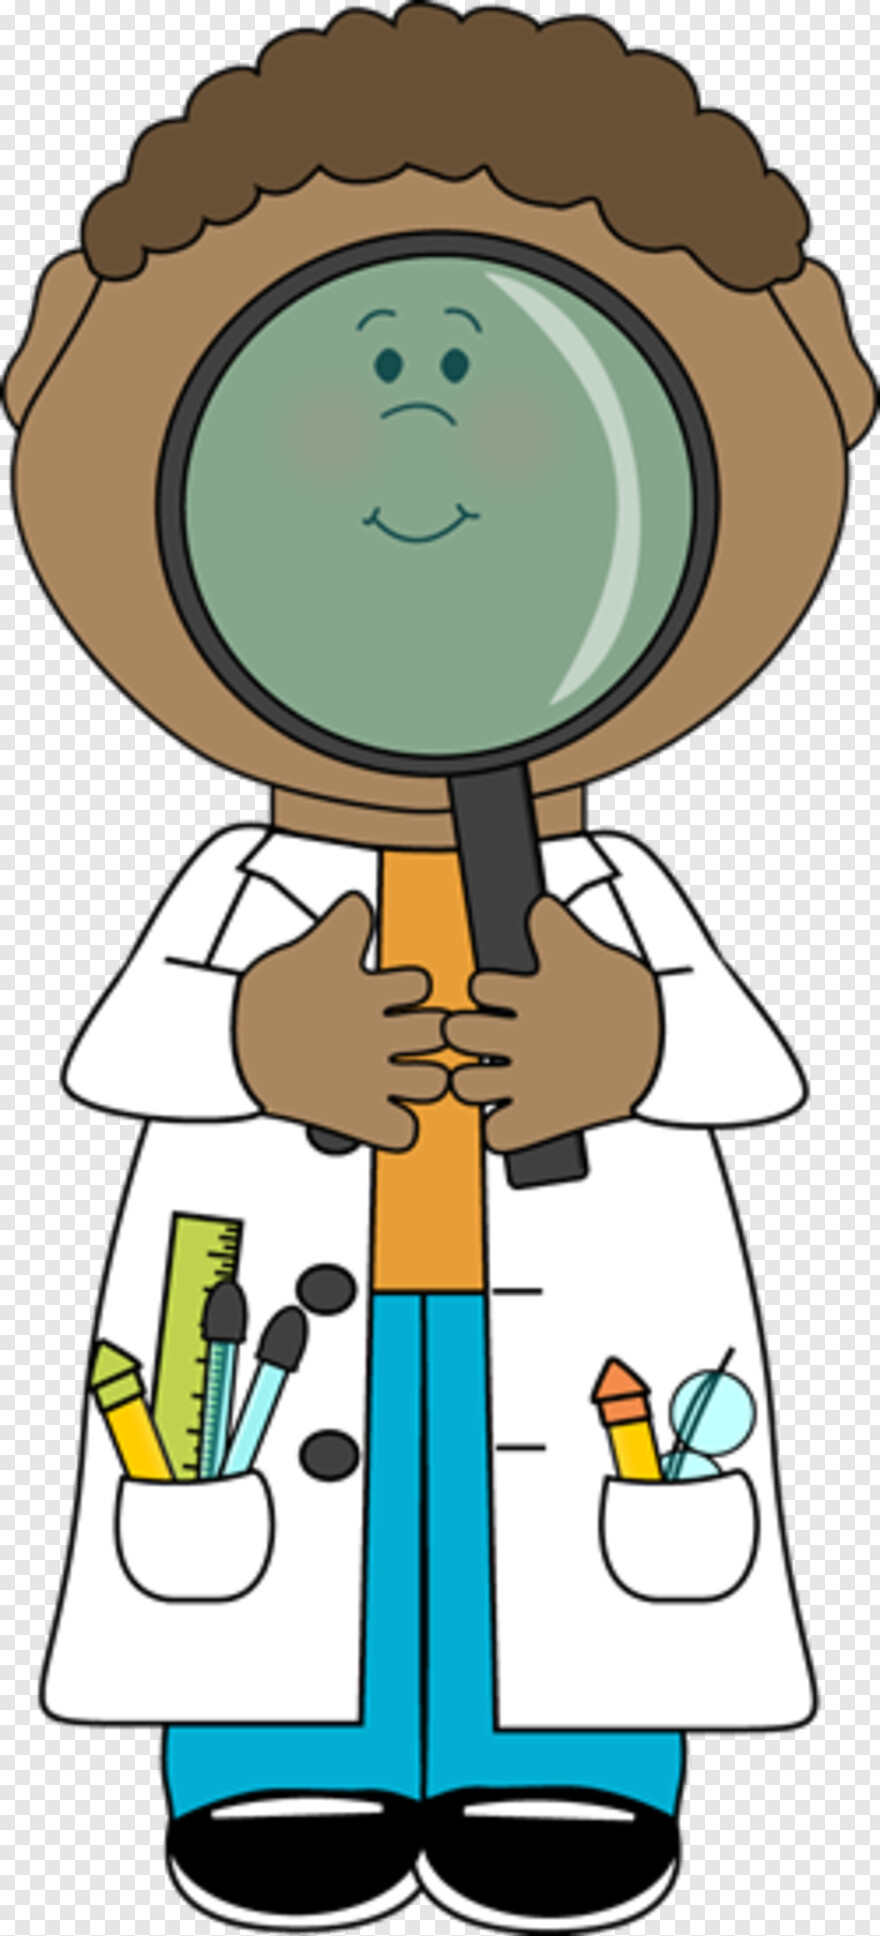 magnifying-glass-vector # 794761